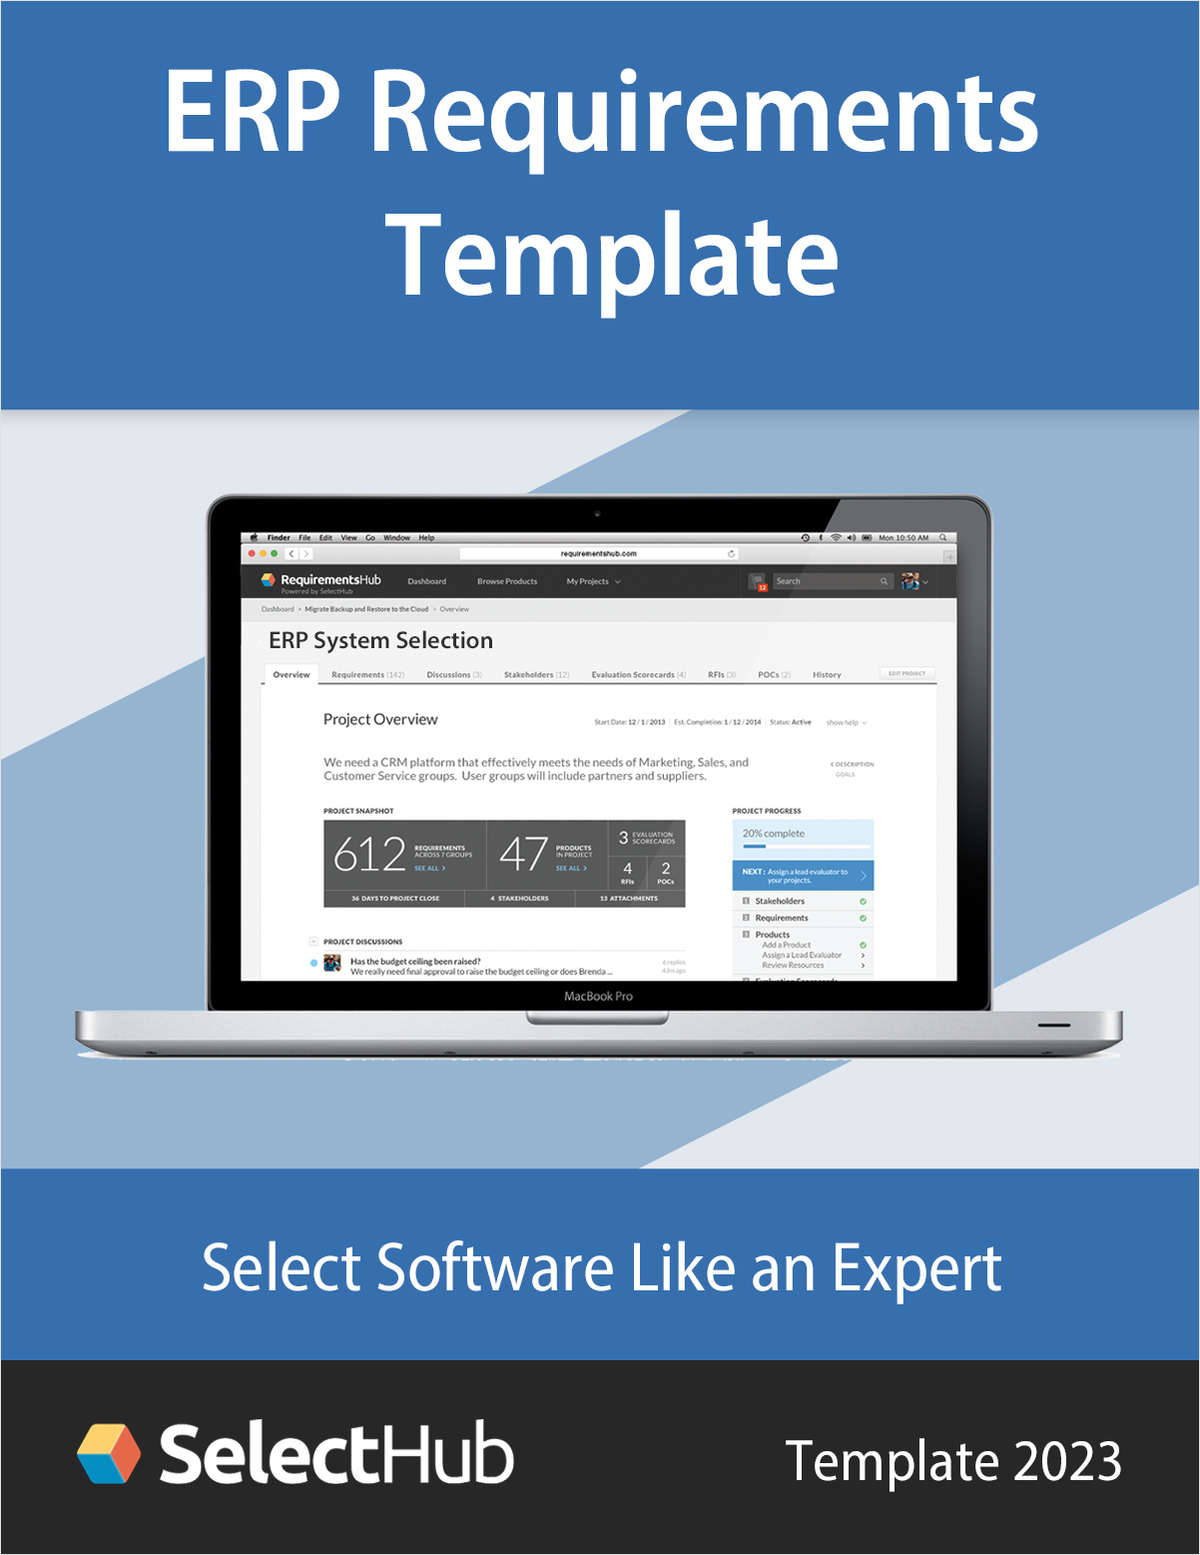 ERP Software Requirements Template for 2023